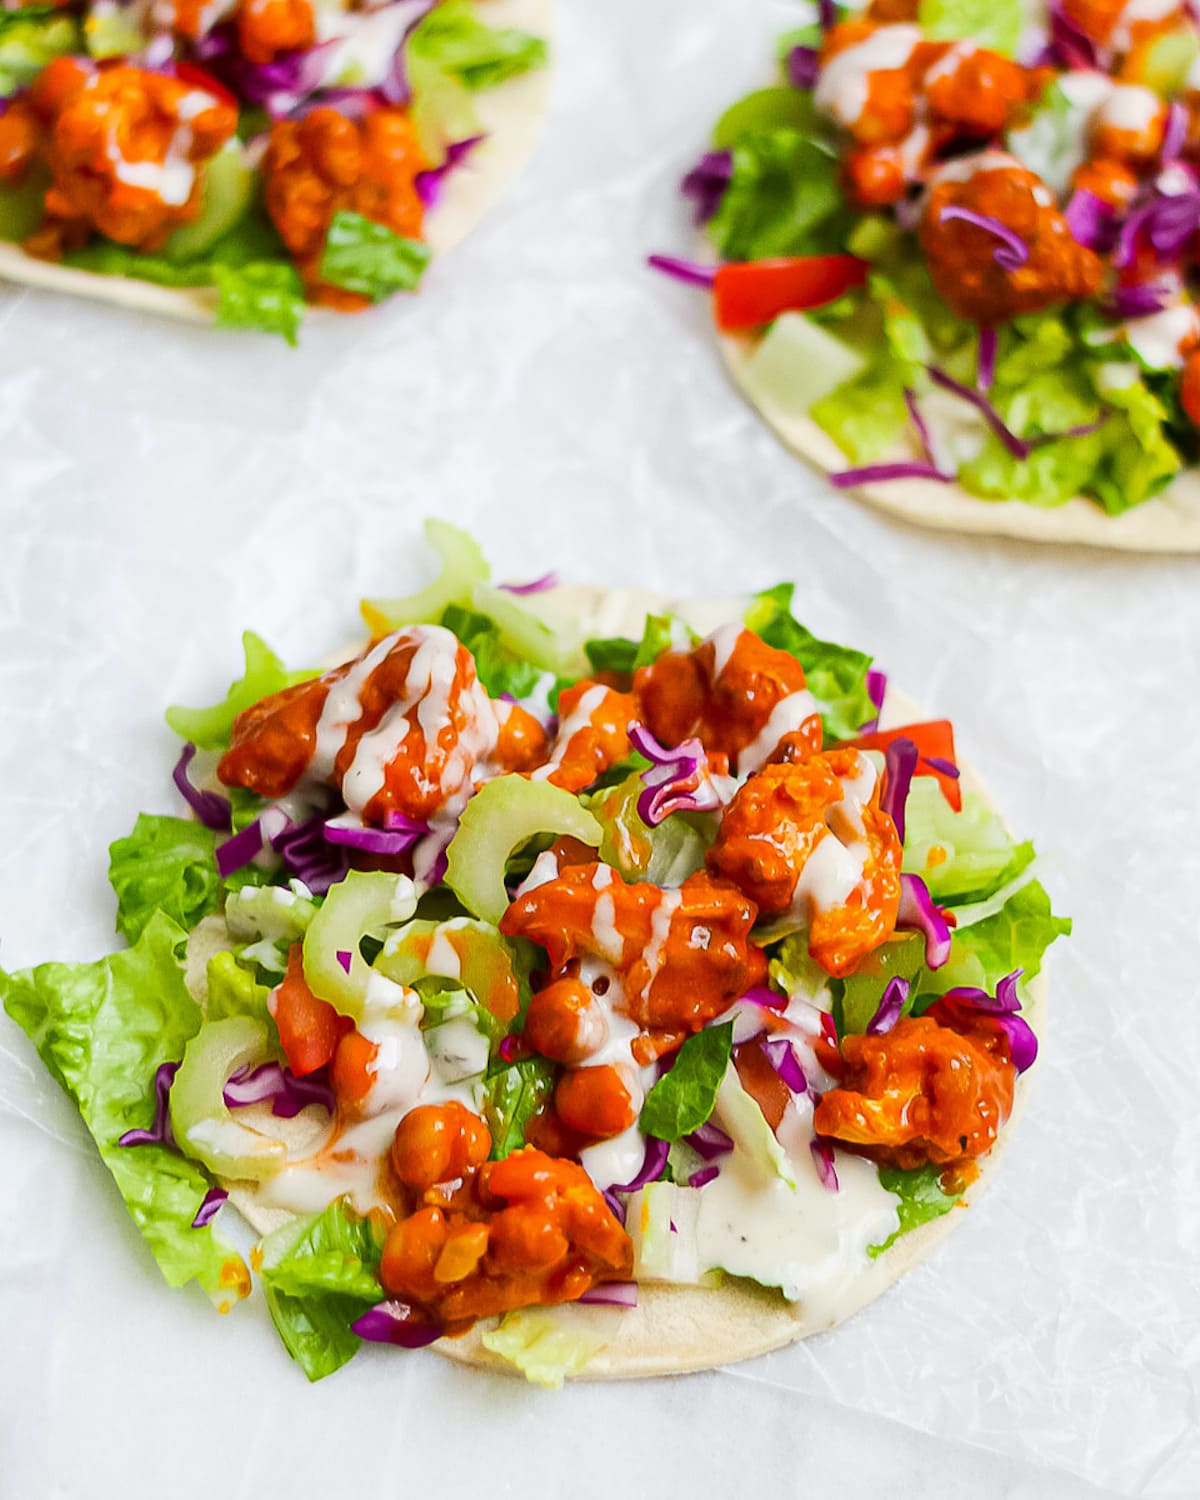 Three tacos with buffalo sauce, cauliflower, chickpeas, lettuce, celery, and tomatoes, with a drizzle of ranch dressing.